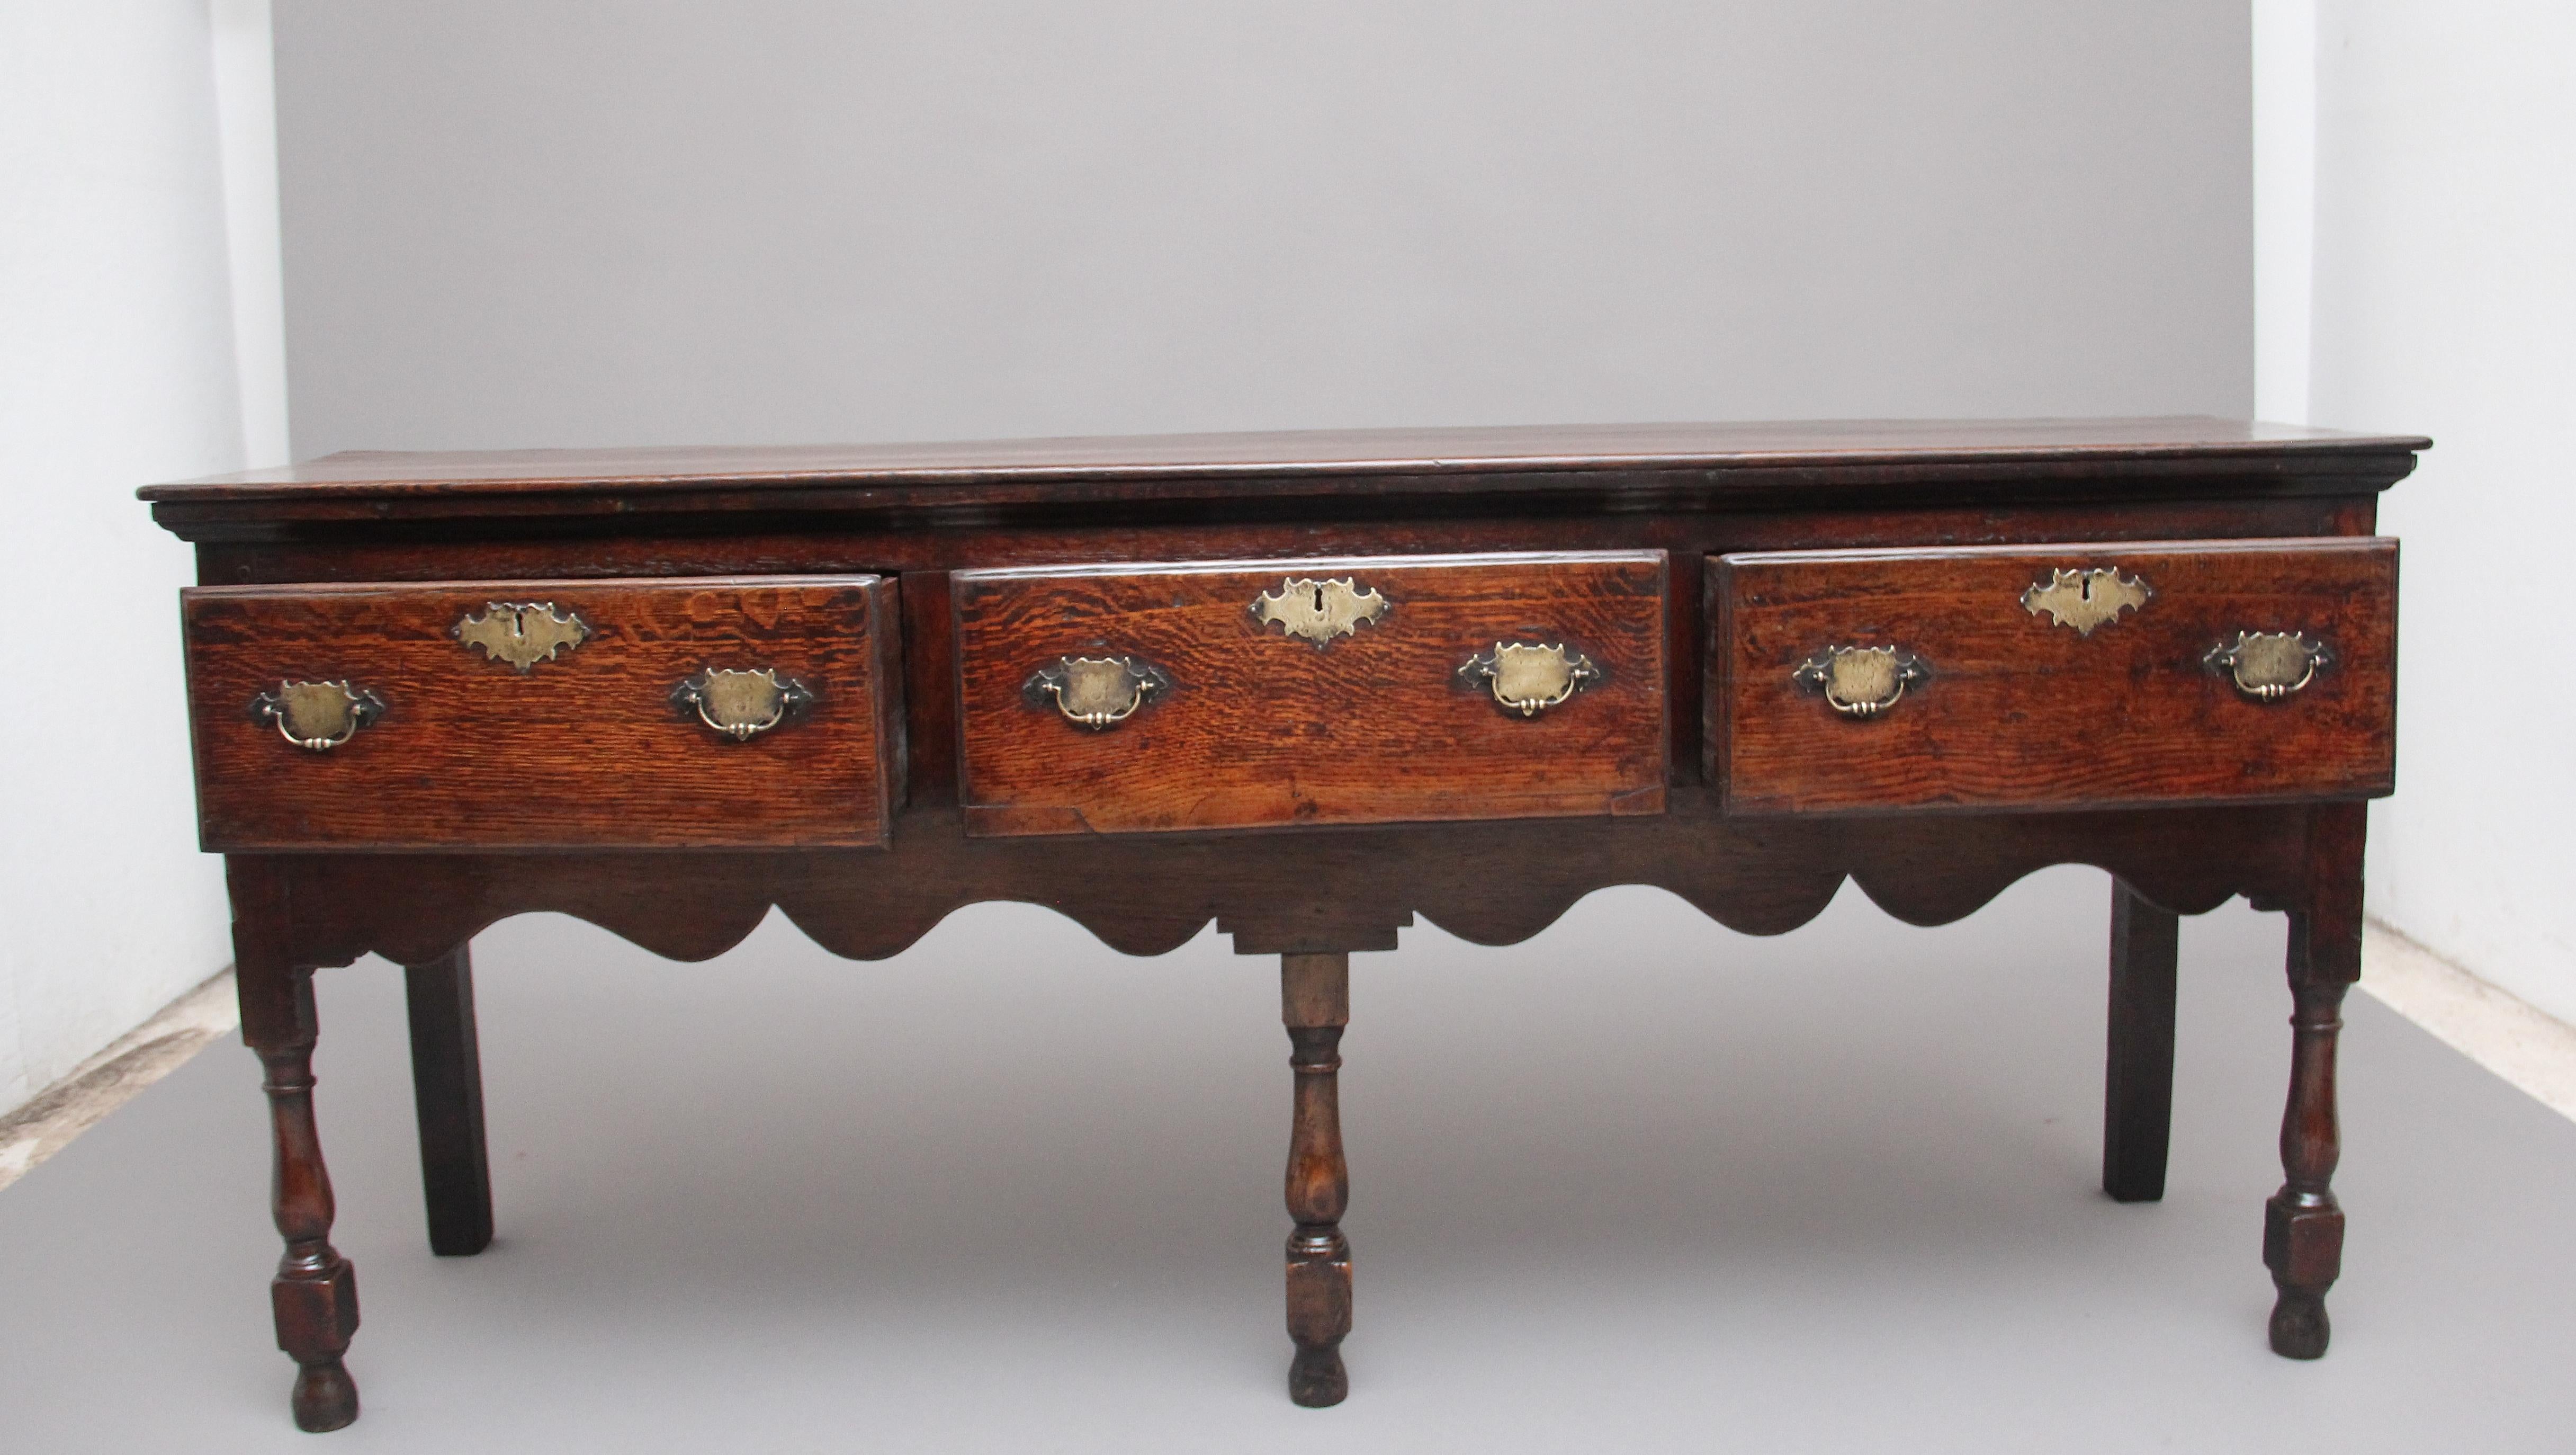 18th century oak dresser with a lovely patina, the moulded edge top above three deep drawers with brass plate handles and escutcheons, nice decorative shaped frieze to the front and sides, supported on front turned legs and rear square legs, circa